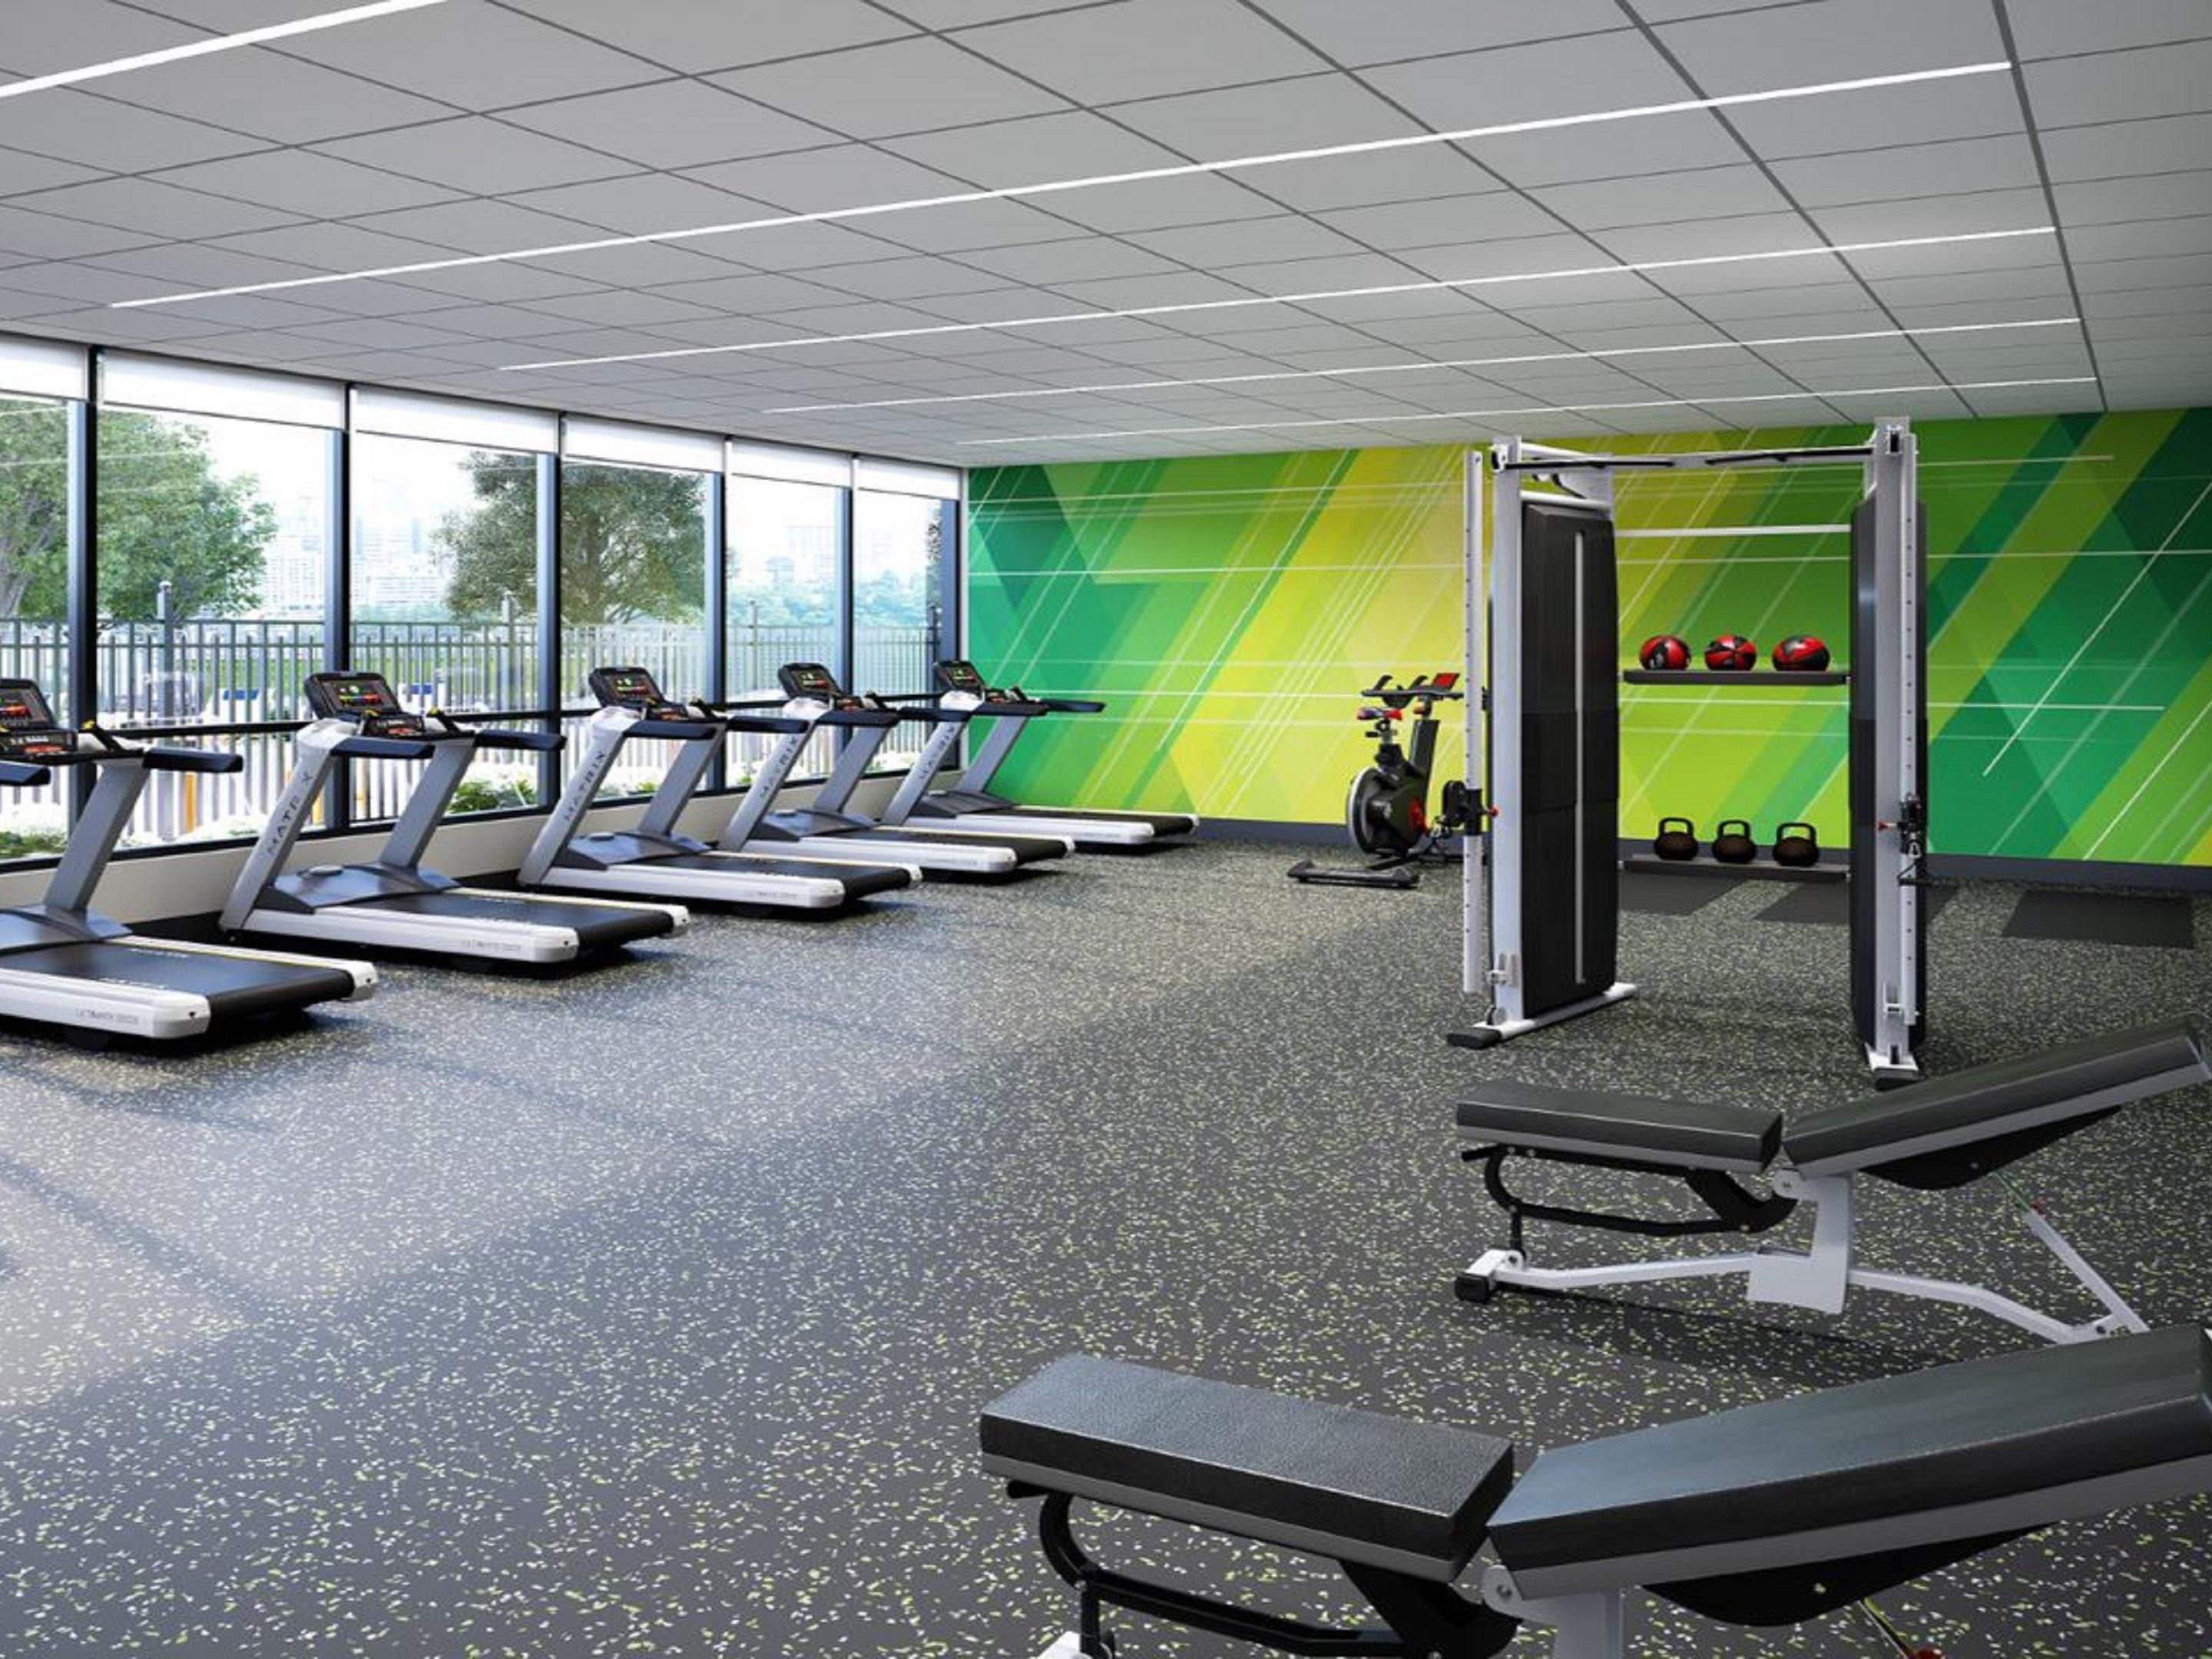 Get your sweat on in our complimentary, fully equipped fitness center- open from 5:30 AM to 11:00 PM.